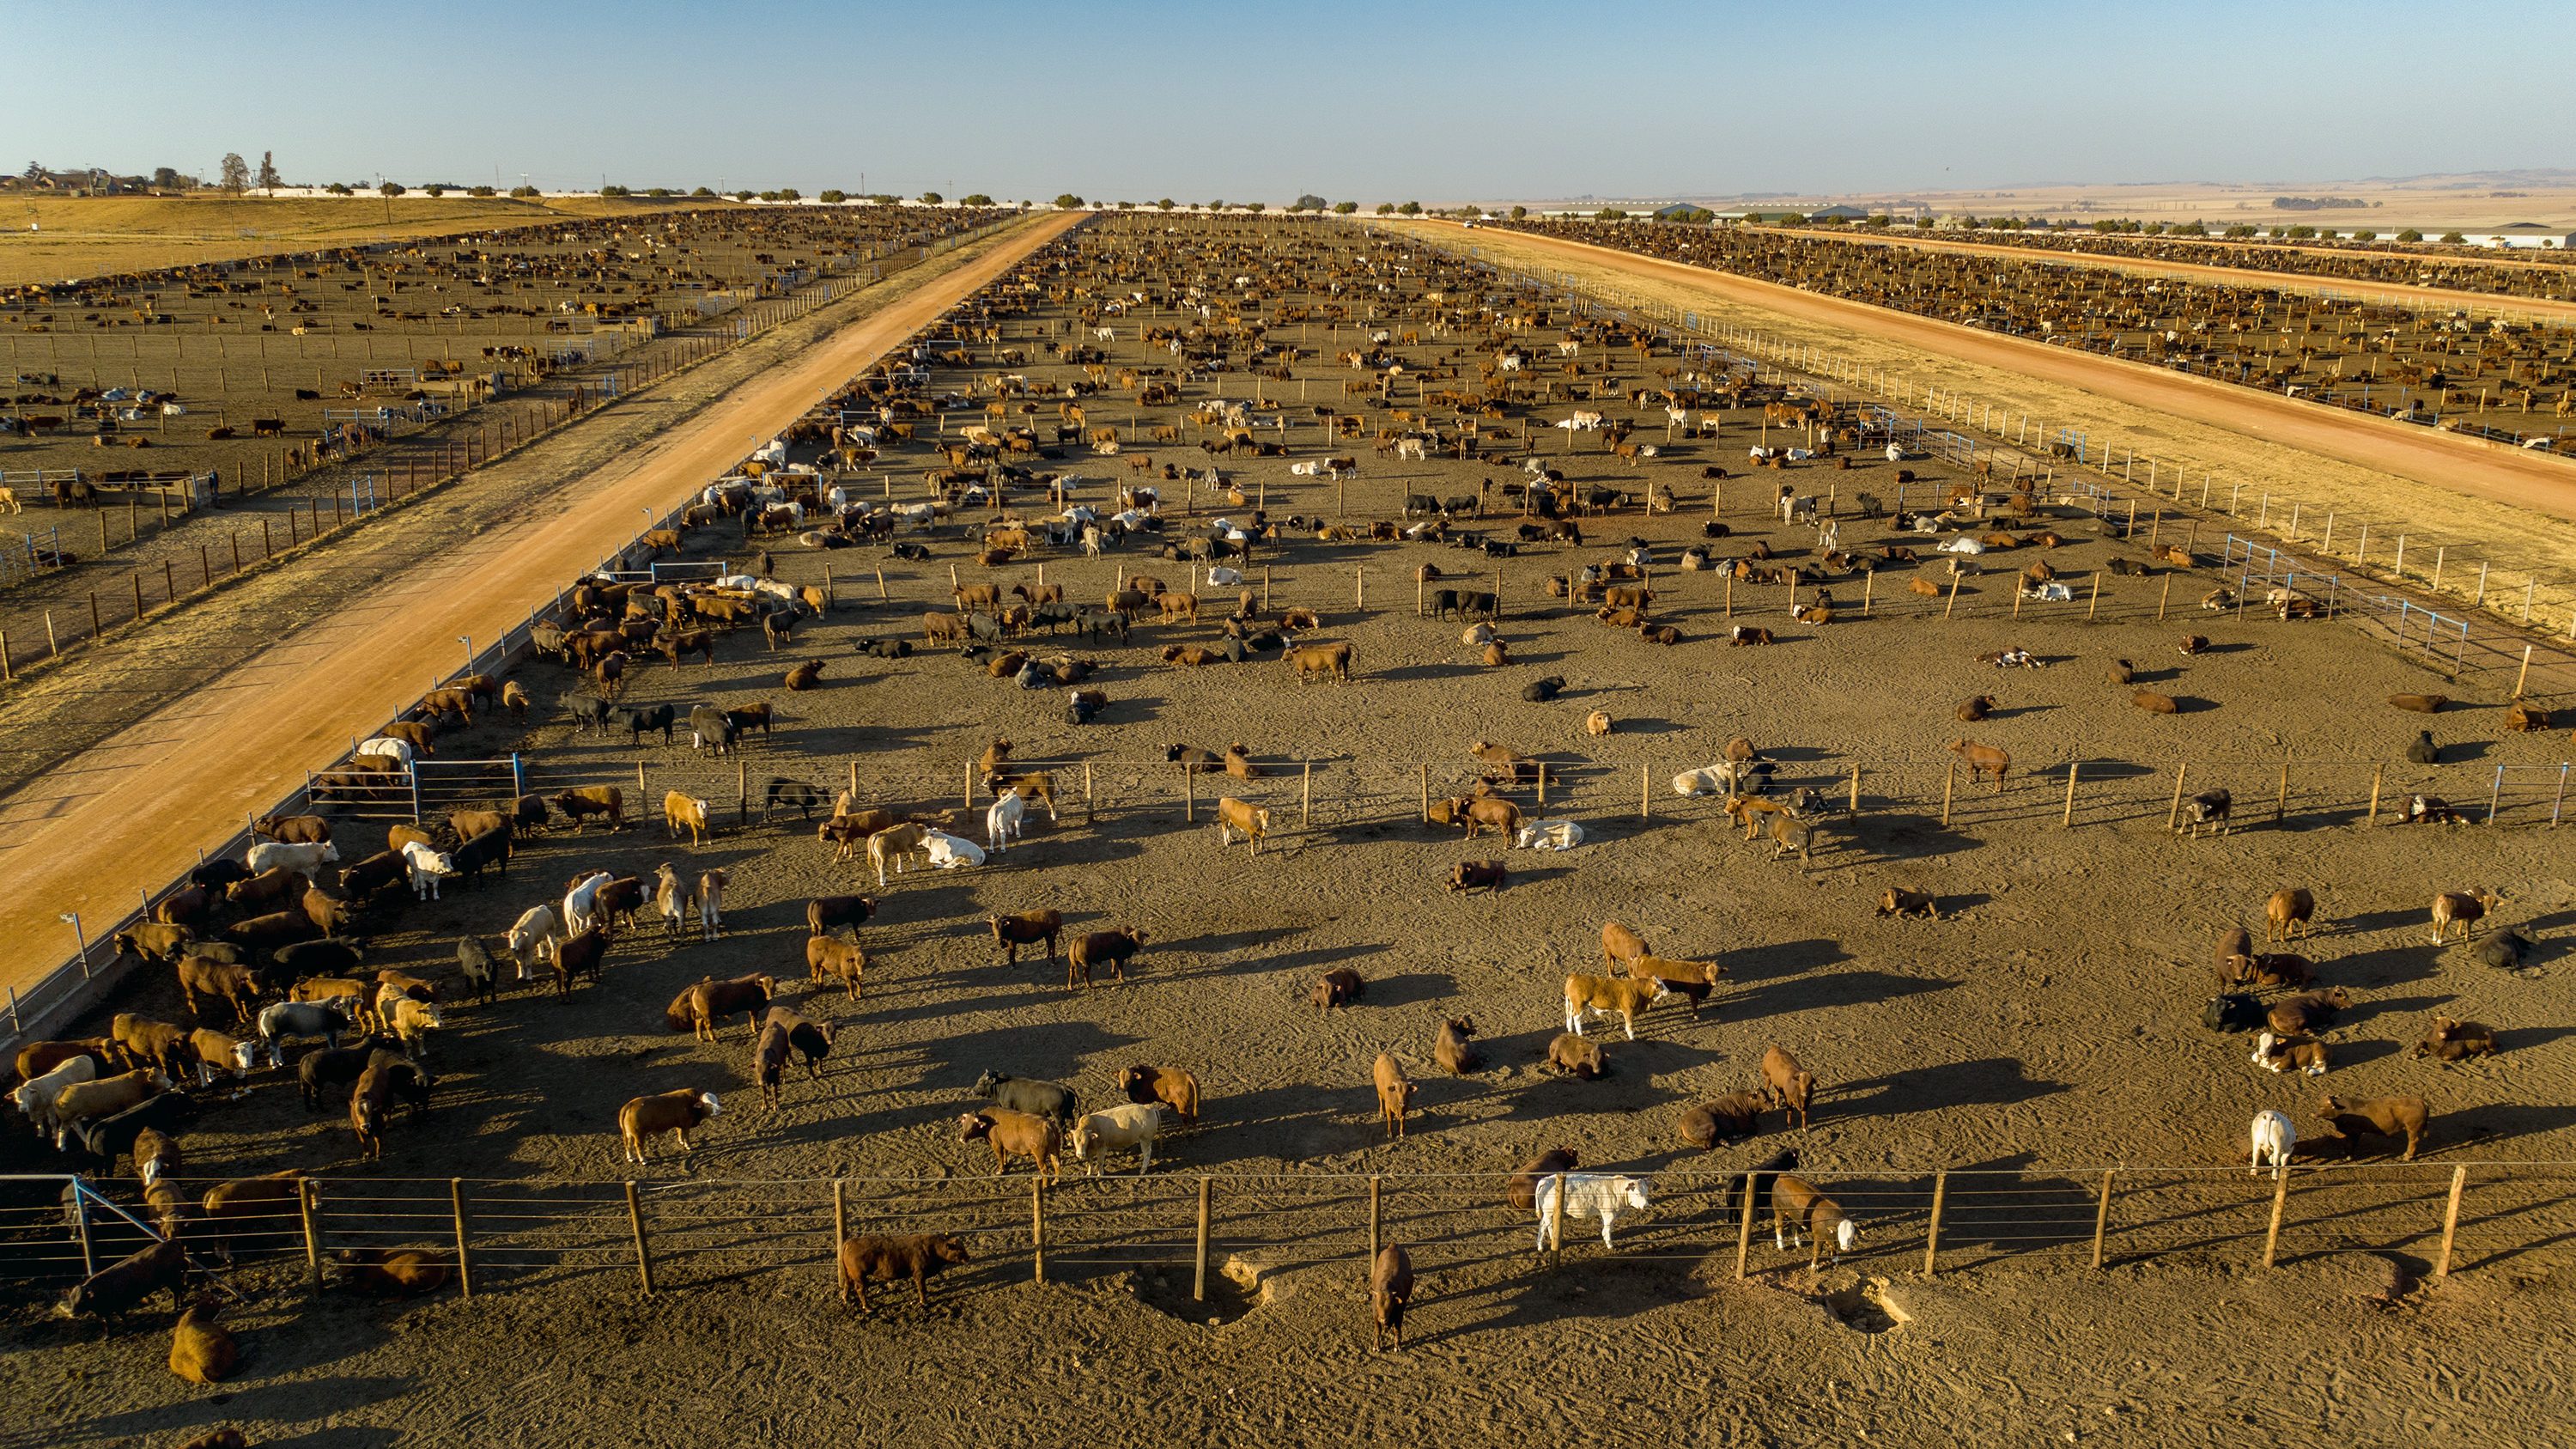 Aerial view of a large cattle feedlot